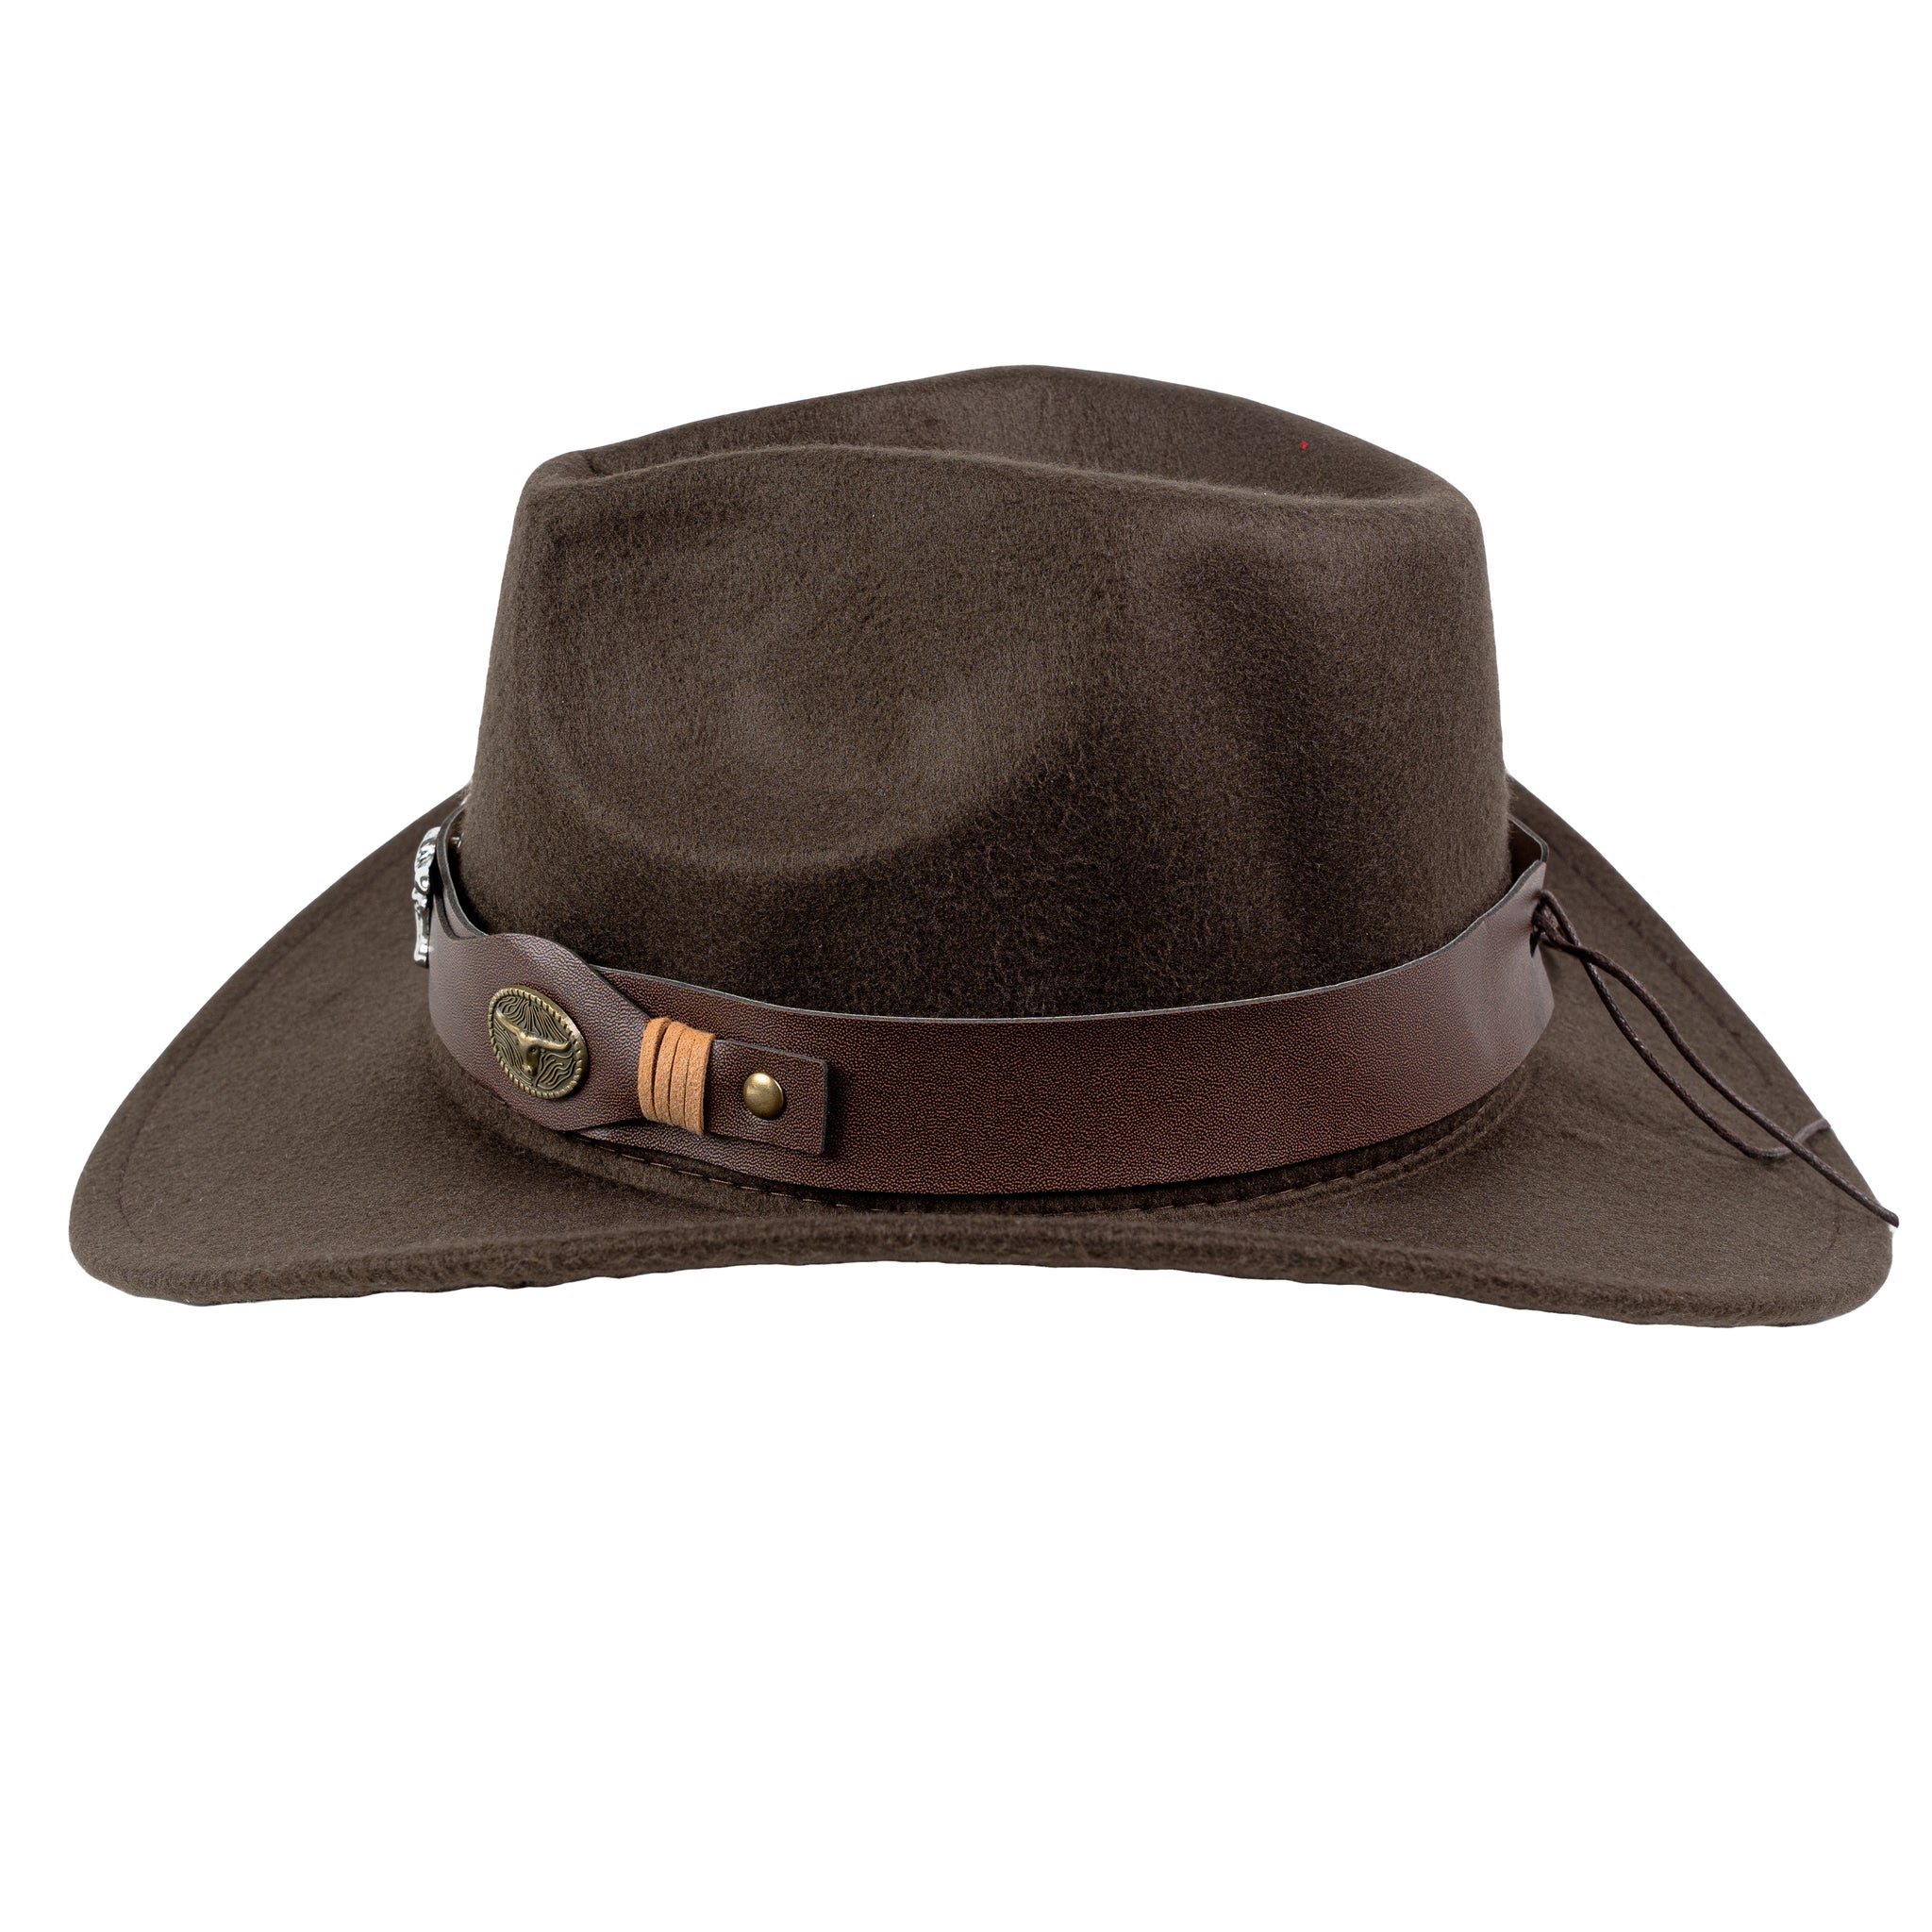 Chokore Pinched Cowboy Hat with Ox head Belt (Chocolate Brown)